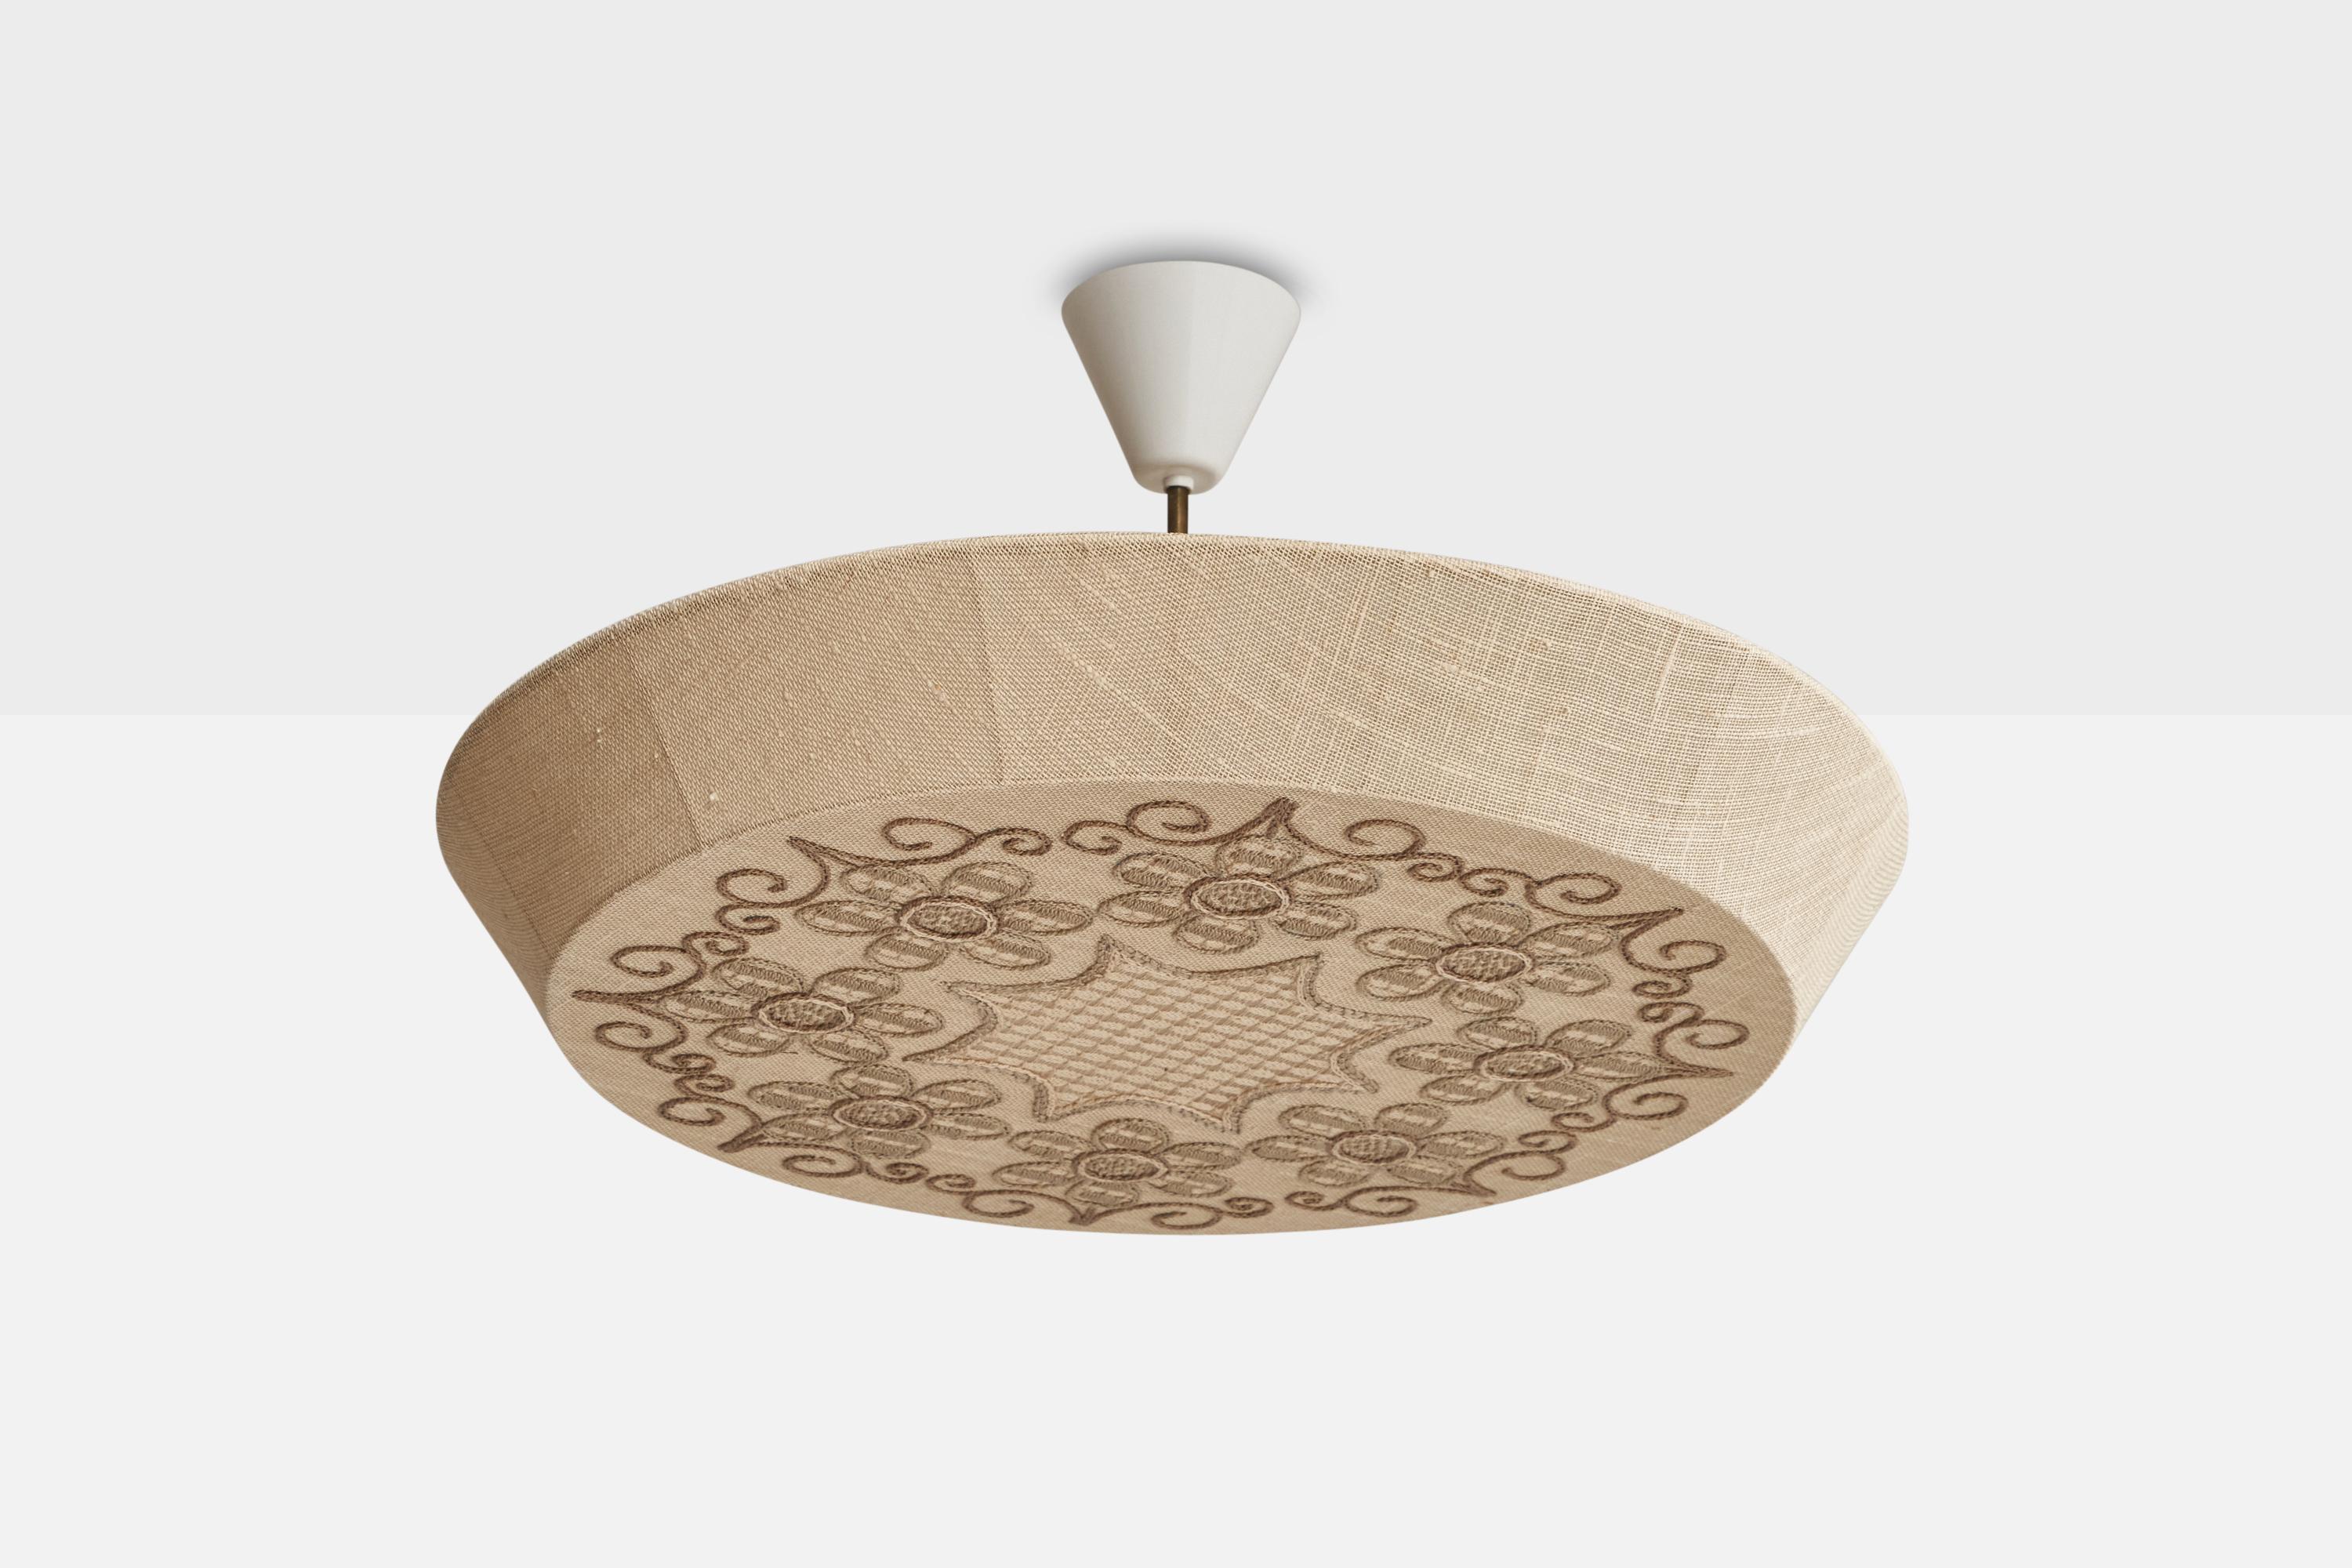 A beige fabric pendant light with hand-embroidery designed and produced in Sweden, c. 1940s.

Dimensions of canopy (inches): 3.4” H x 4.4” Diameter
Socket takes standard E-14 bulbs. 3 sockets.There is no maximum wattage stated on the fixture. All